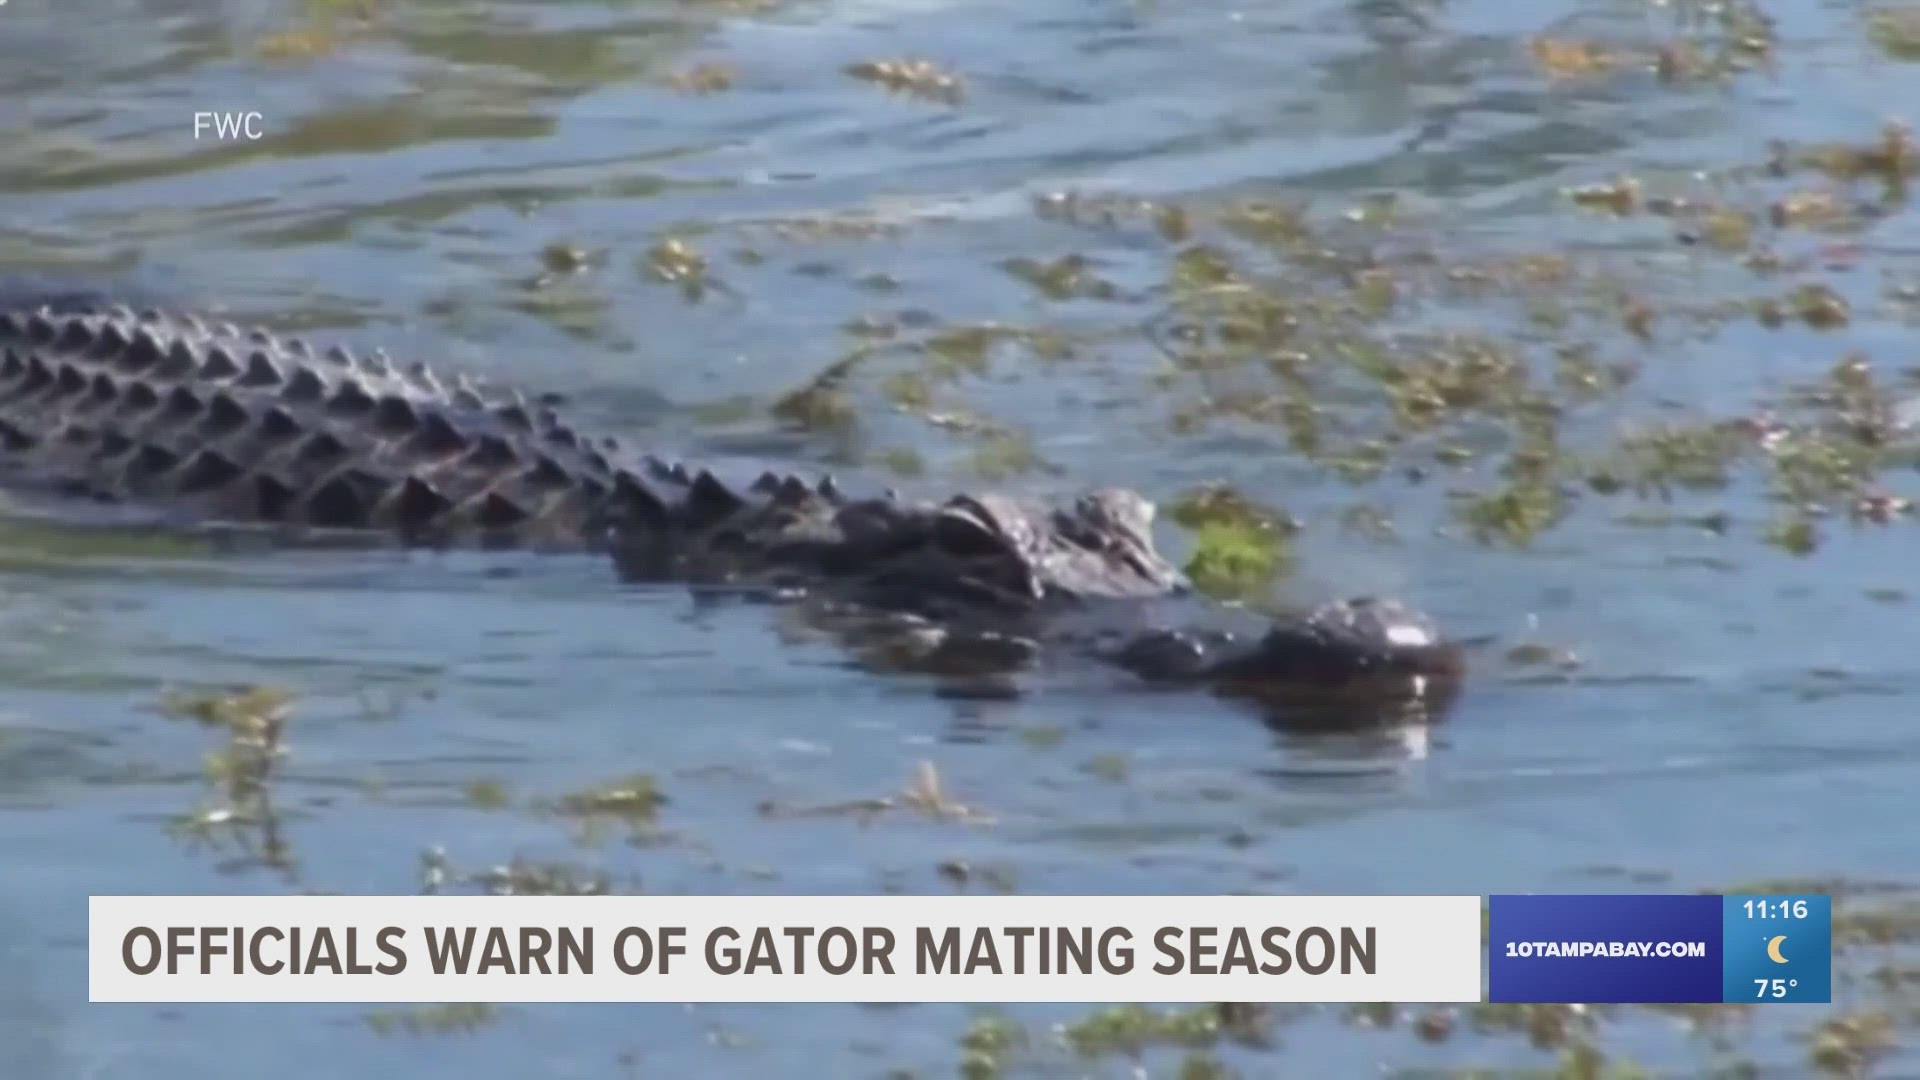 Florida Fish and Wildlife Conservation Commission says gators begin to find partners around early April before mating begins between May and June.